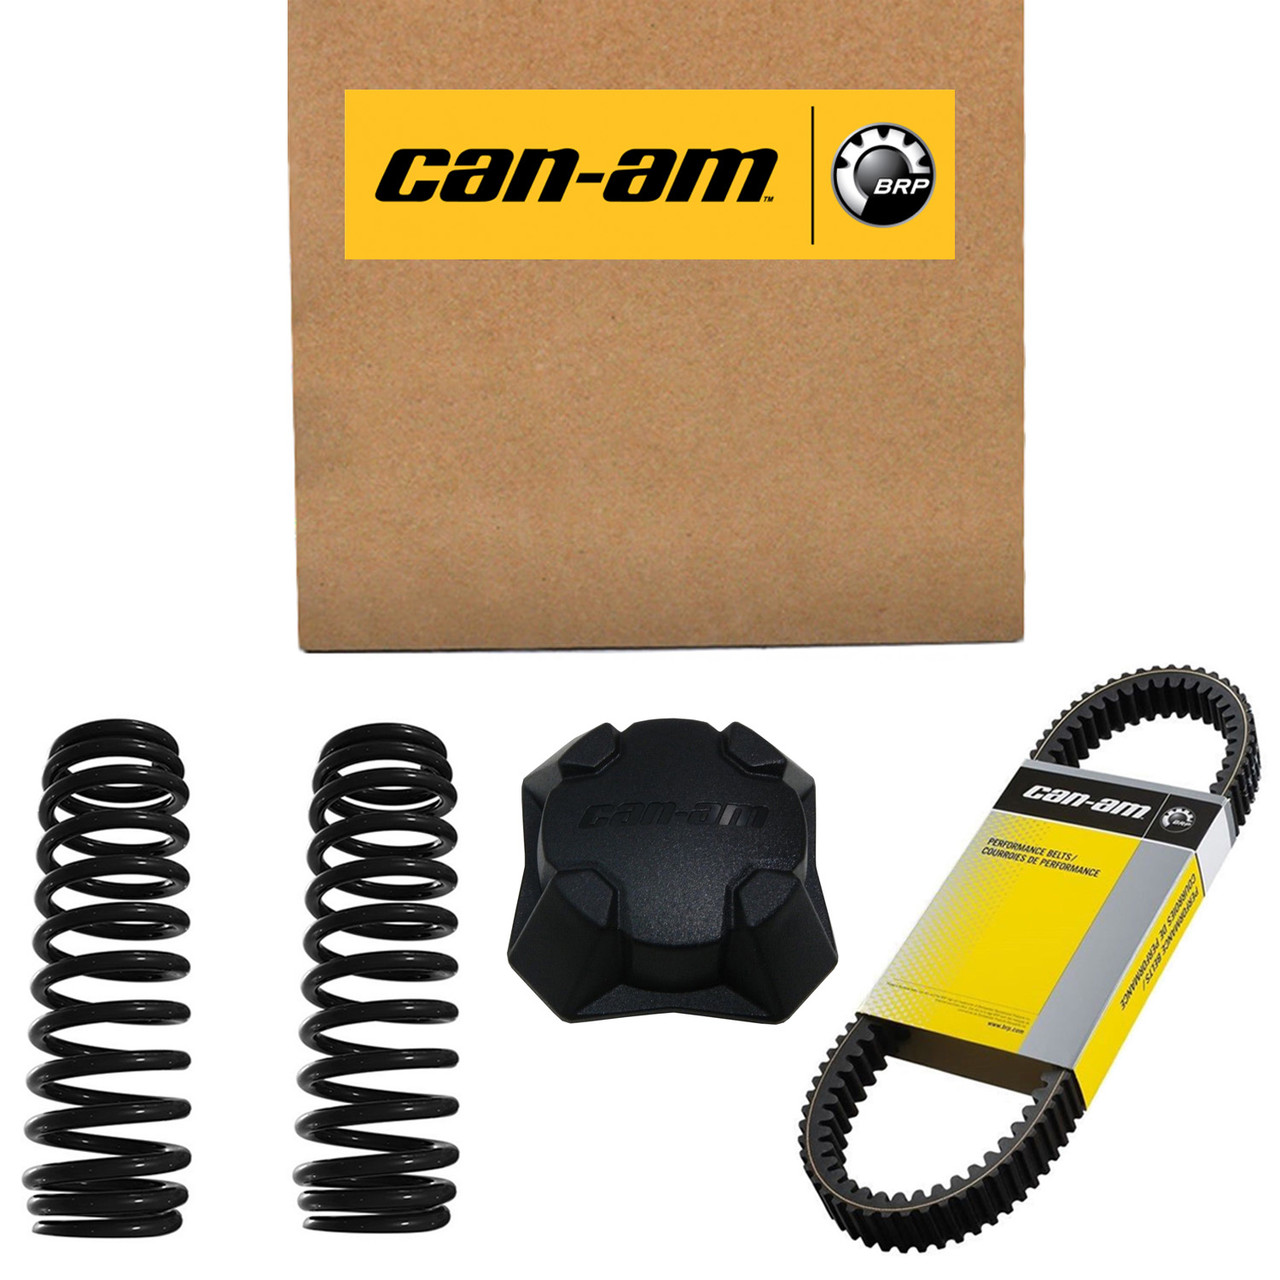 Can-Am New OEM Rh Reflector Support, 708301539